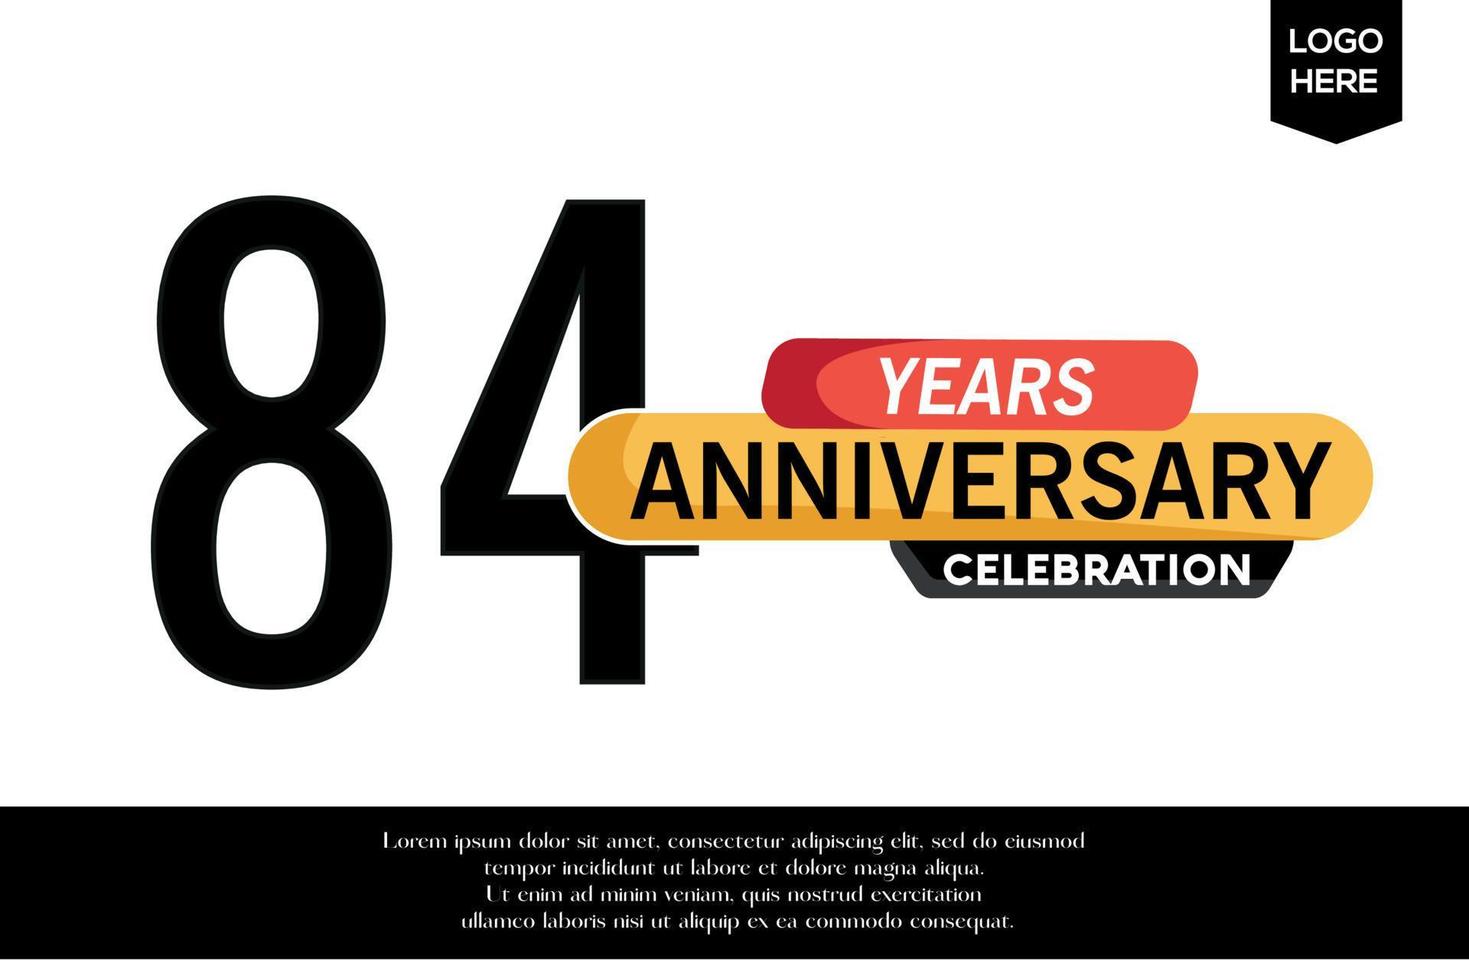 84th anniversary celebration logotype black yellow colored with text in gray color isolated on white background vector template design